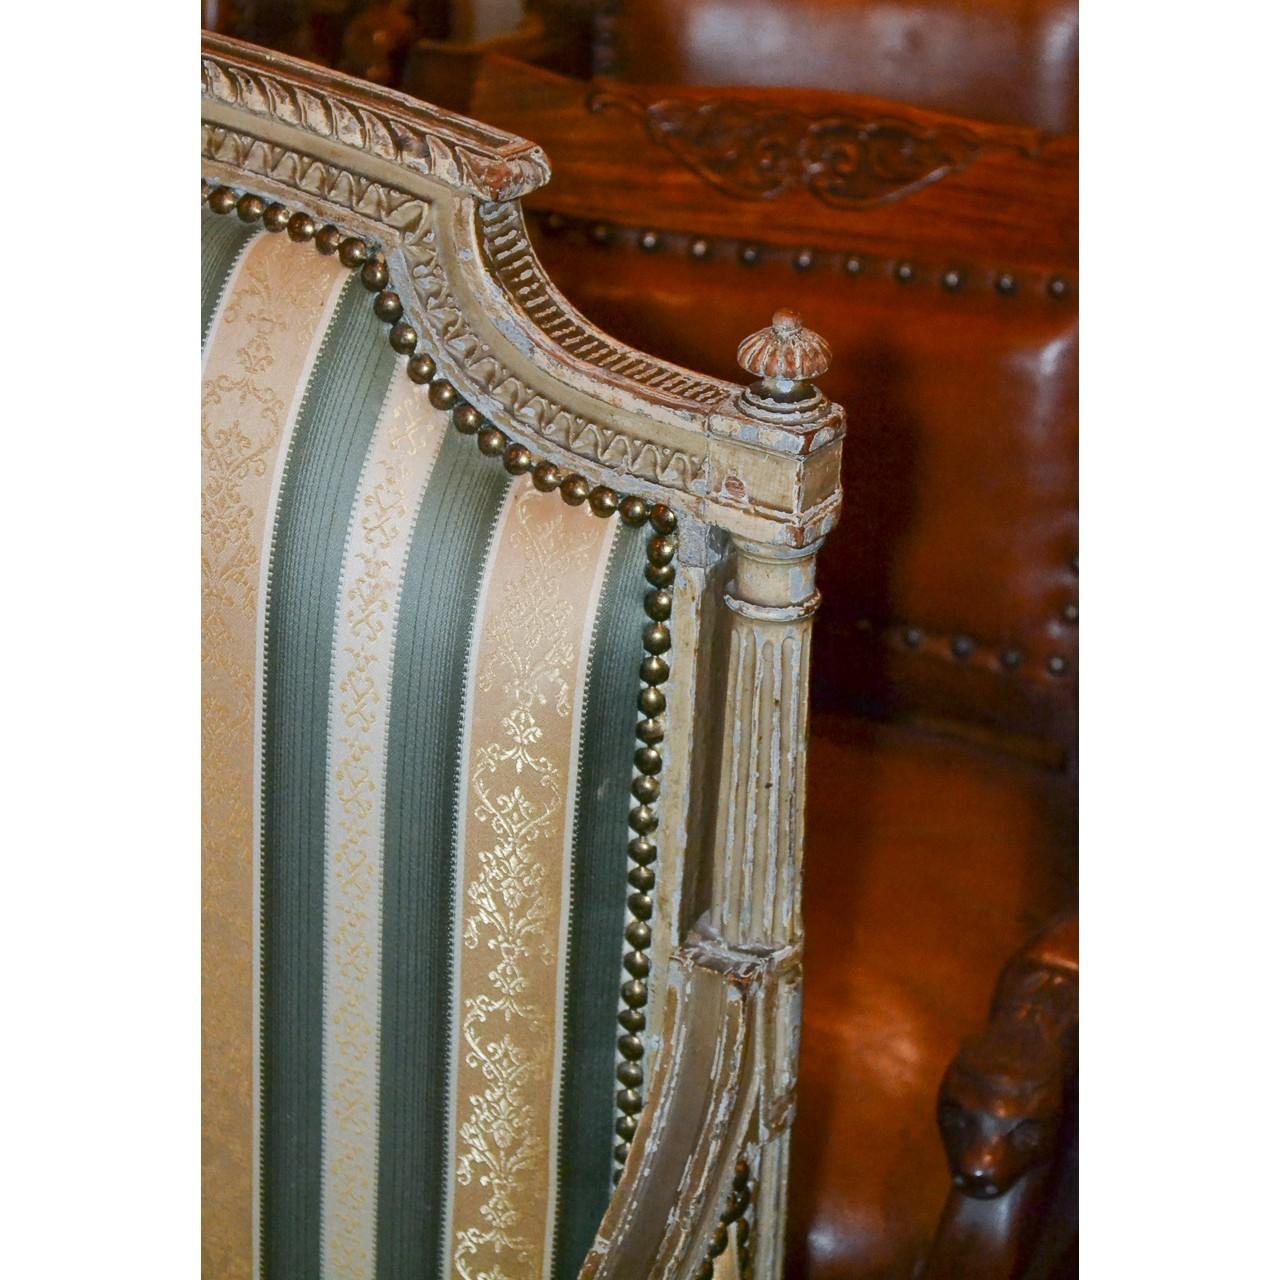 Stunning 19th century French Louis XVI style painted settee or sofa with a finely carved famed having a light gray patina. Beautiful striped damask upholstery and raised on classic tapered and fluted legs,

circa 1870.

Great focal piece!!